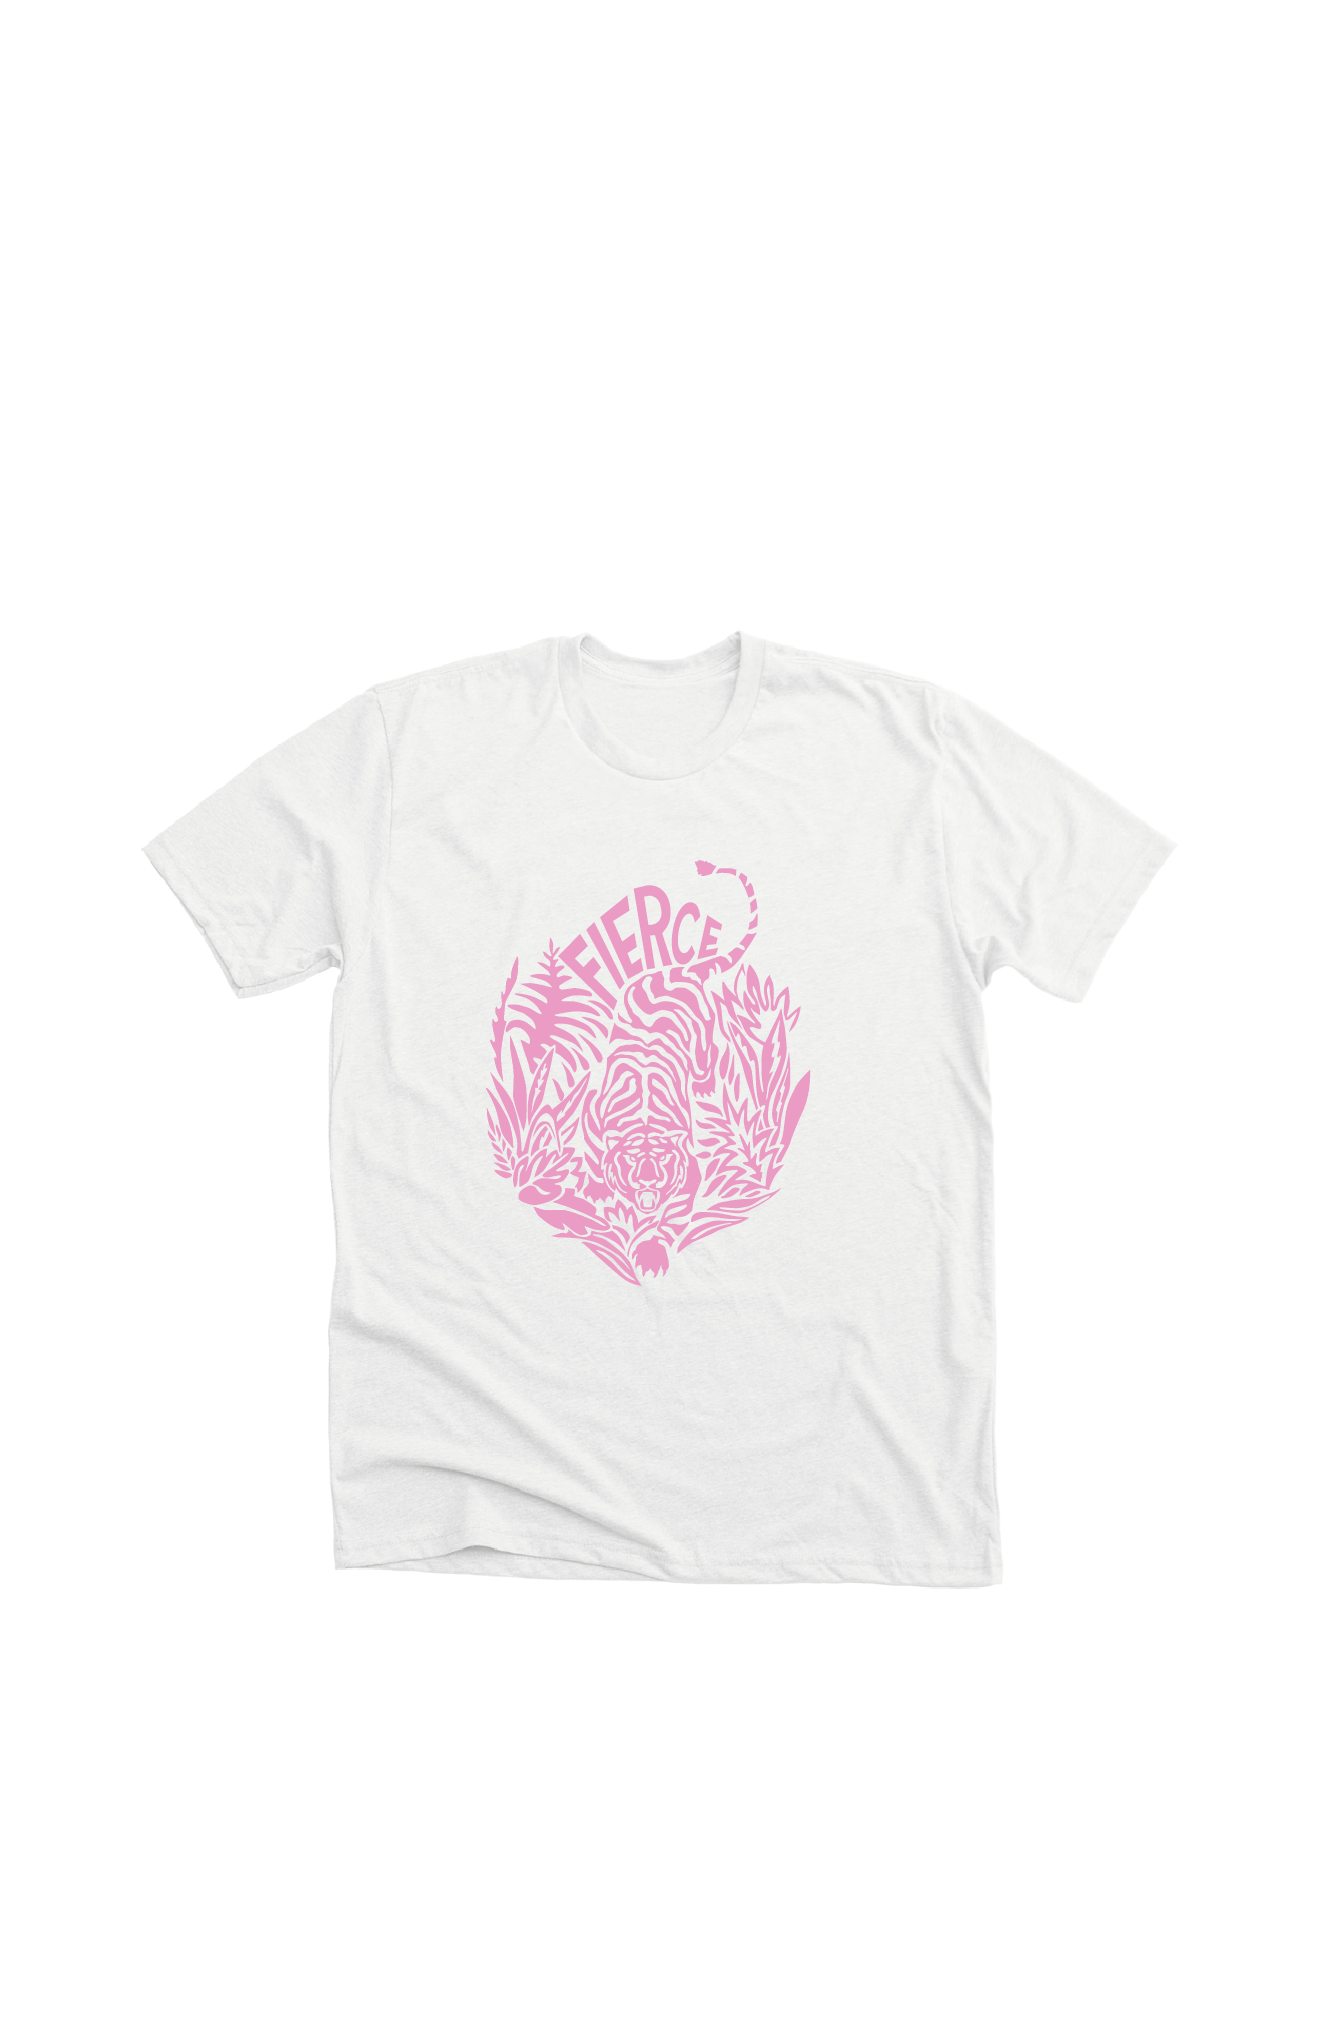 Unisex white t-shirt with a light pink print of a tiger on the front